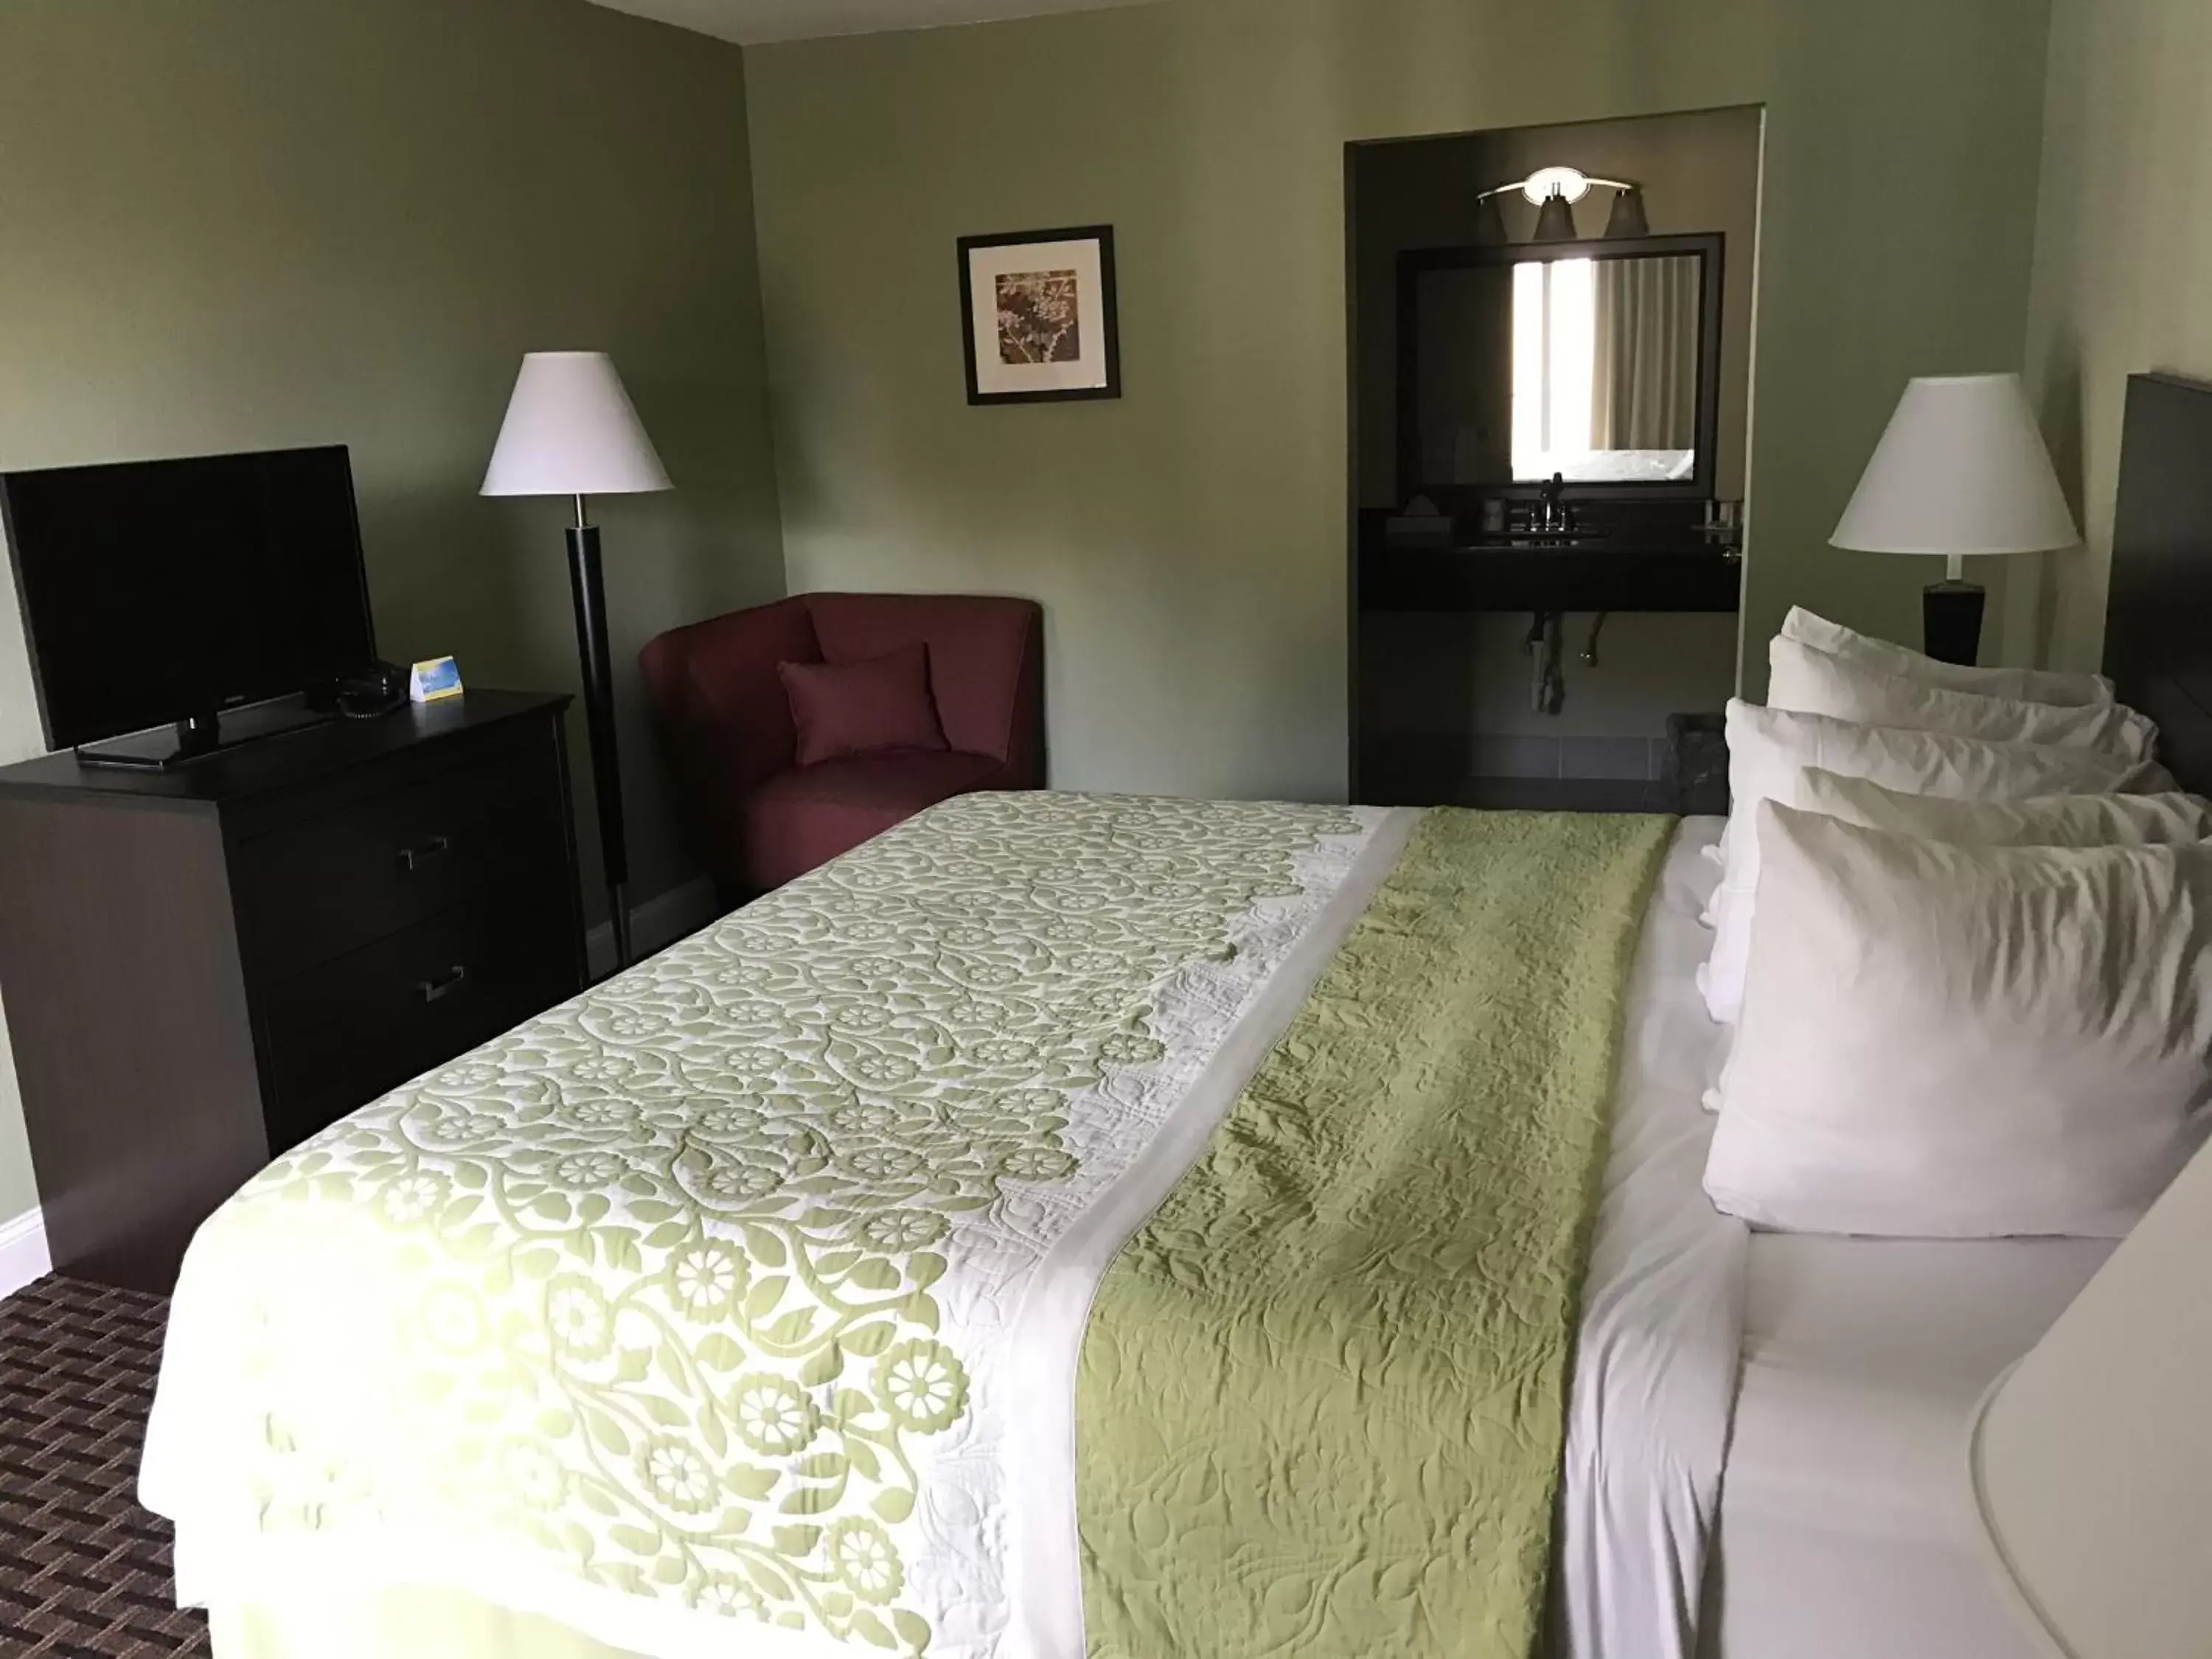 Deluxe King Suite in Days Inn by Wyndham Jellico - Tennessee State Line